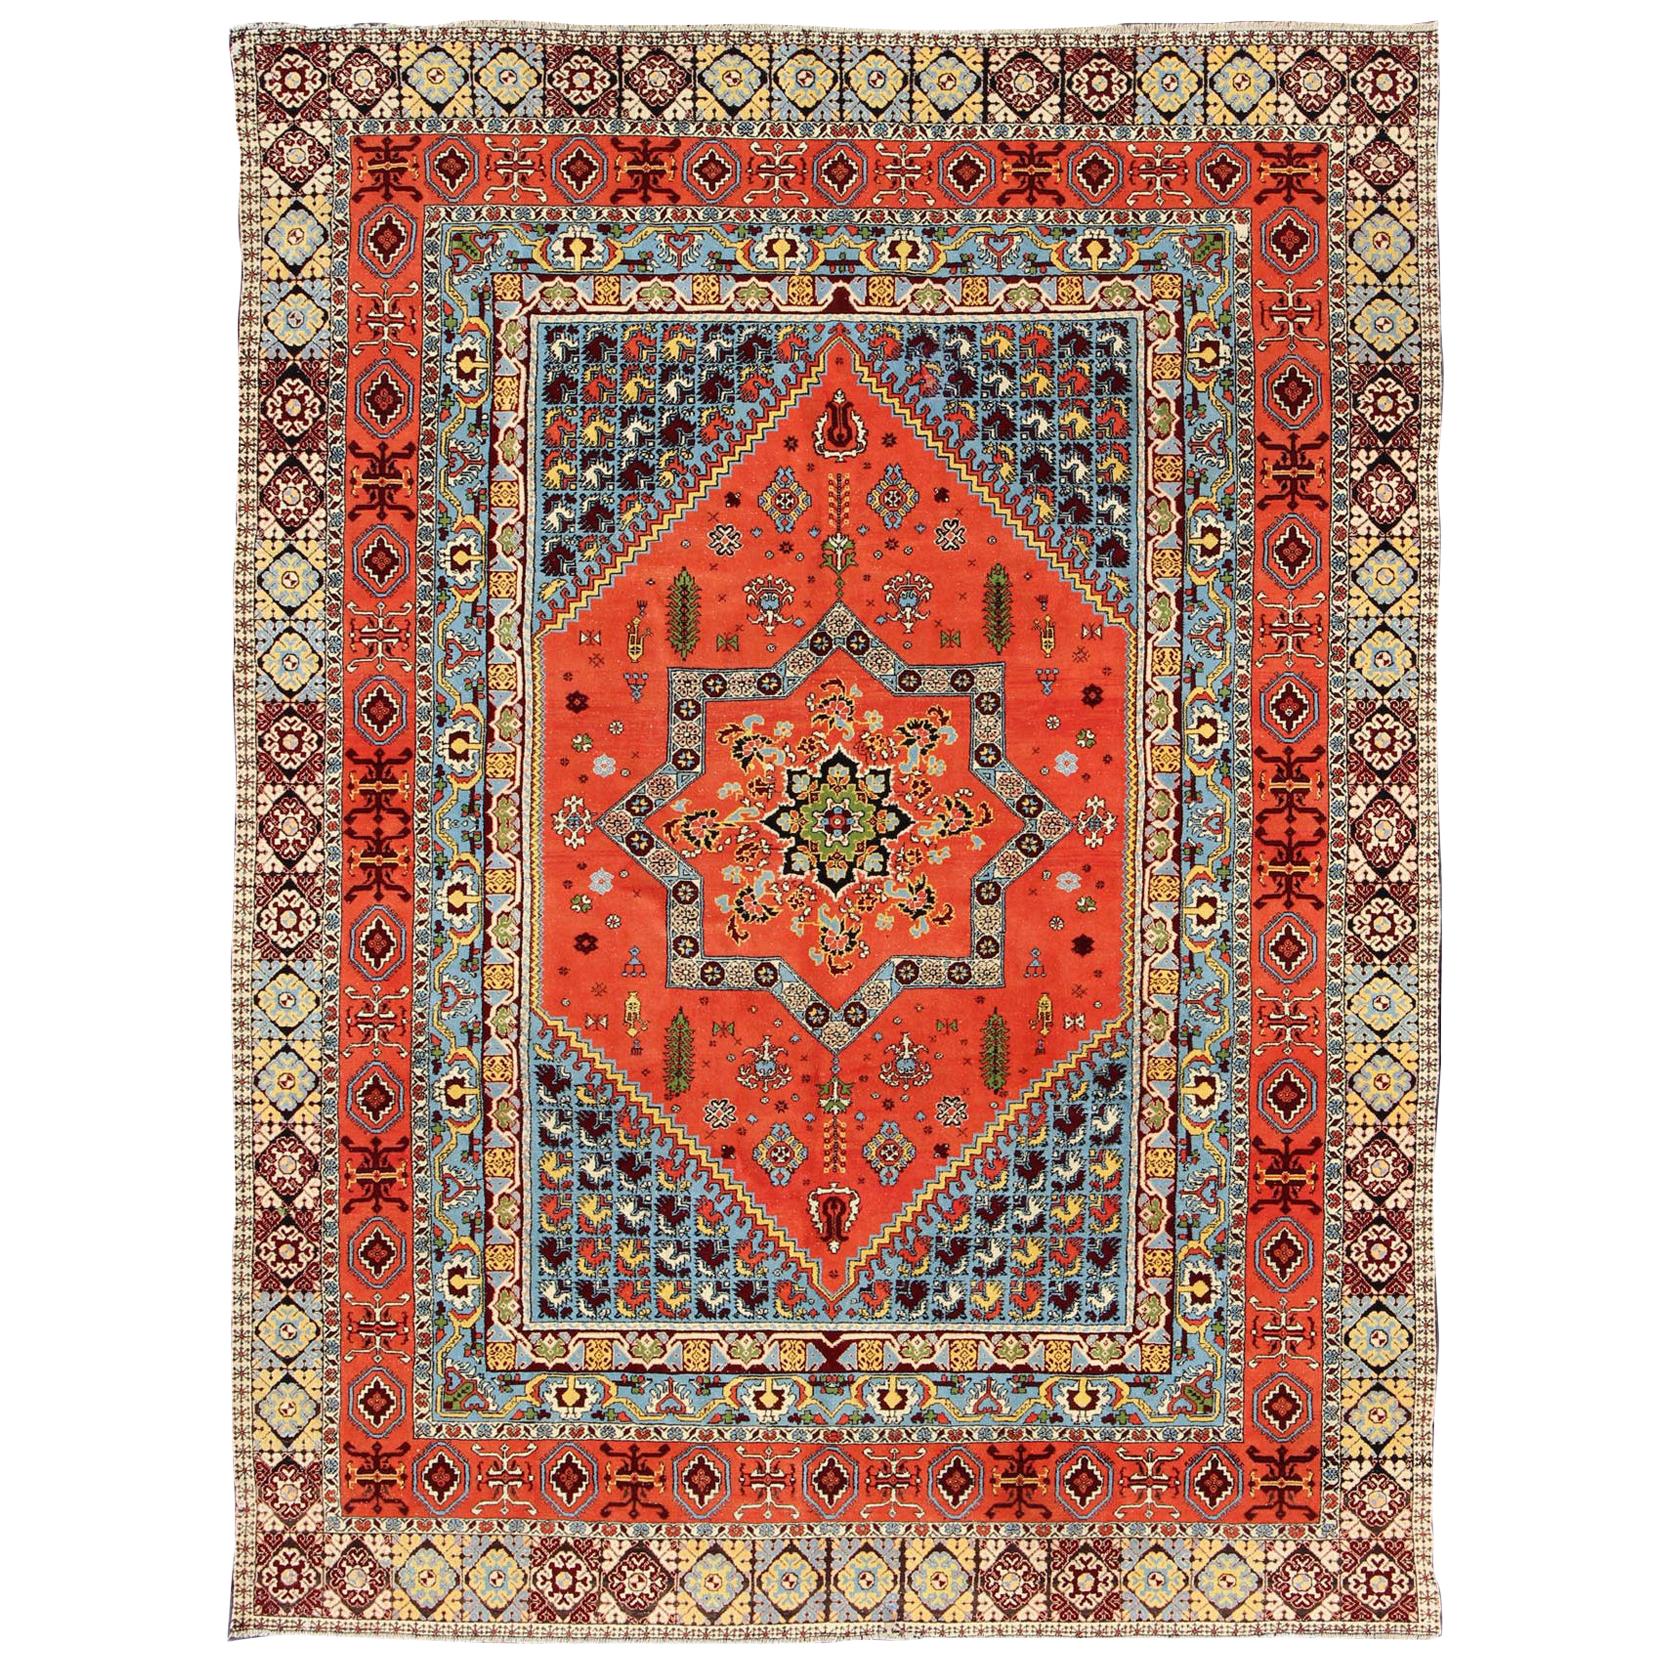 Large Colorful Vintage Moroccan Rug in Medallion Design and Tribal Elements